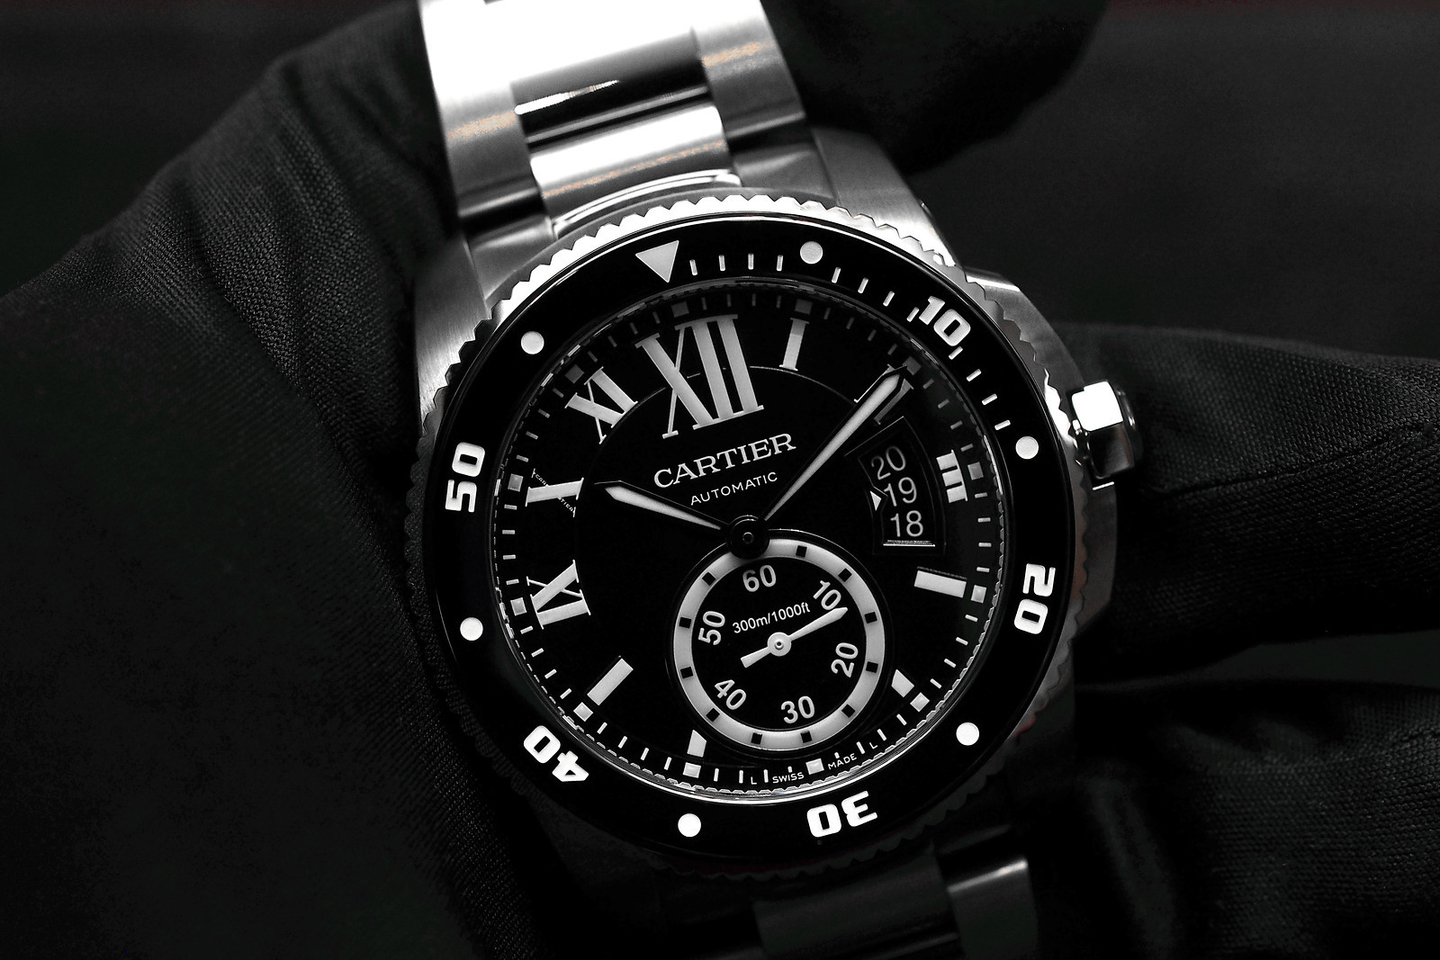 Hands-On with Cartier’s New Diver’s Watch